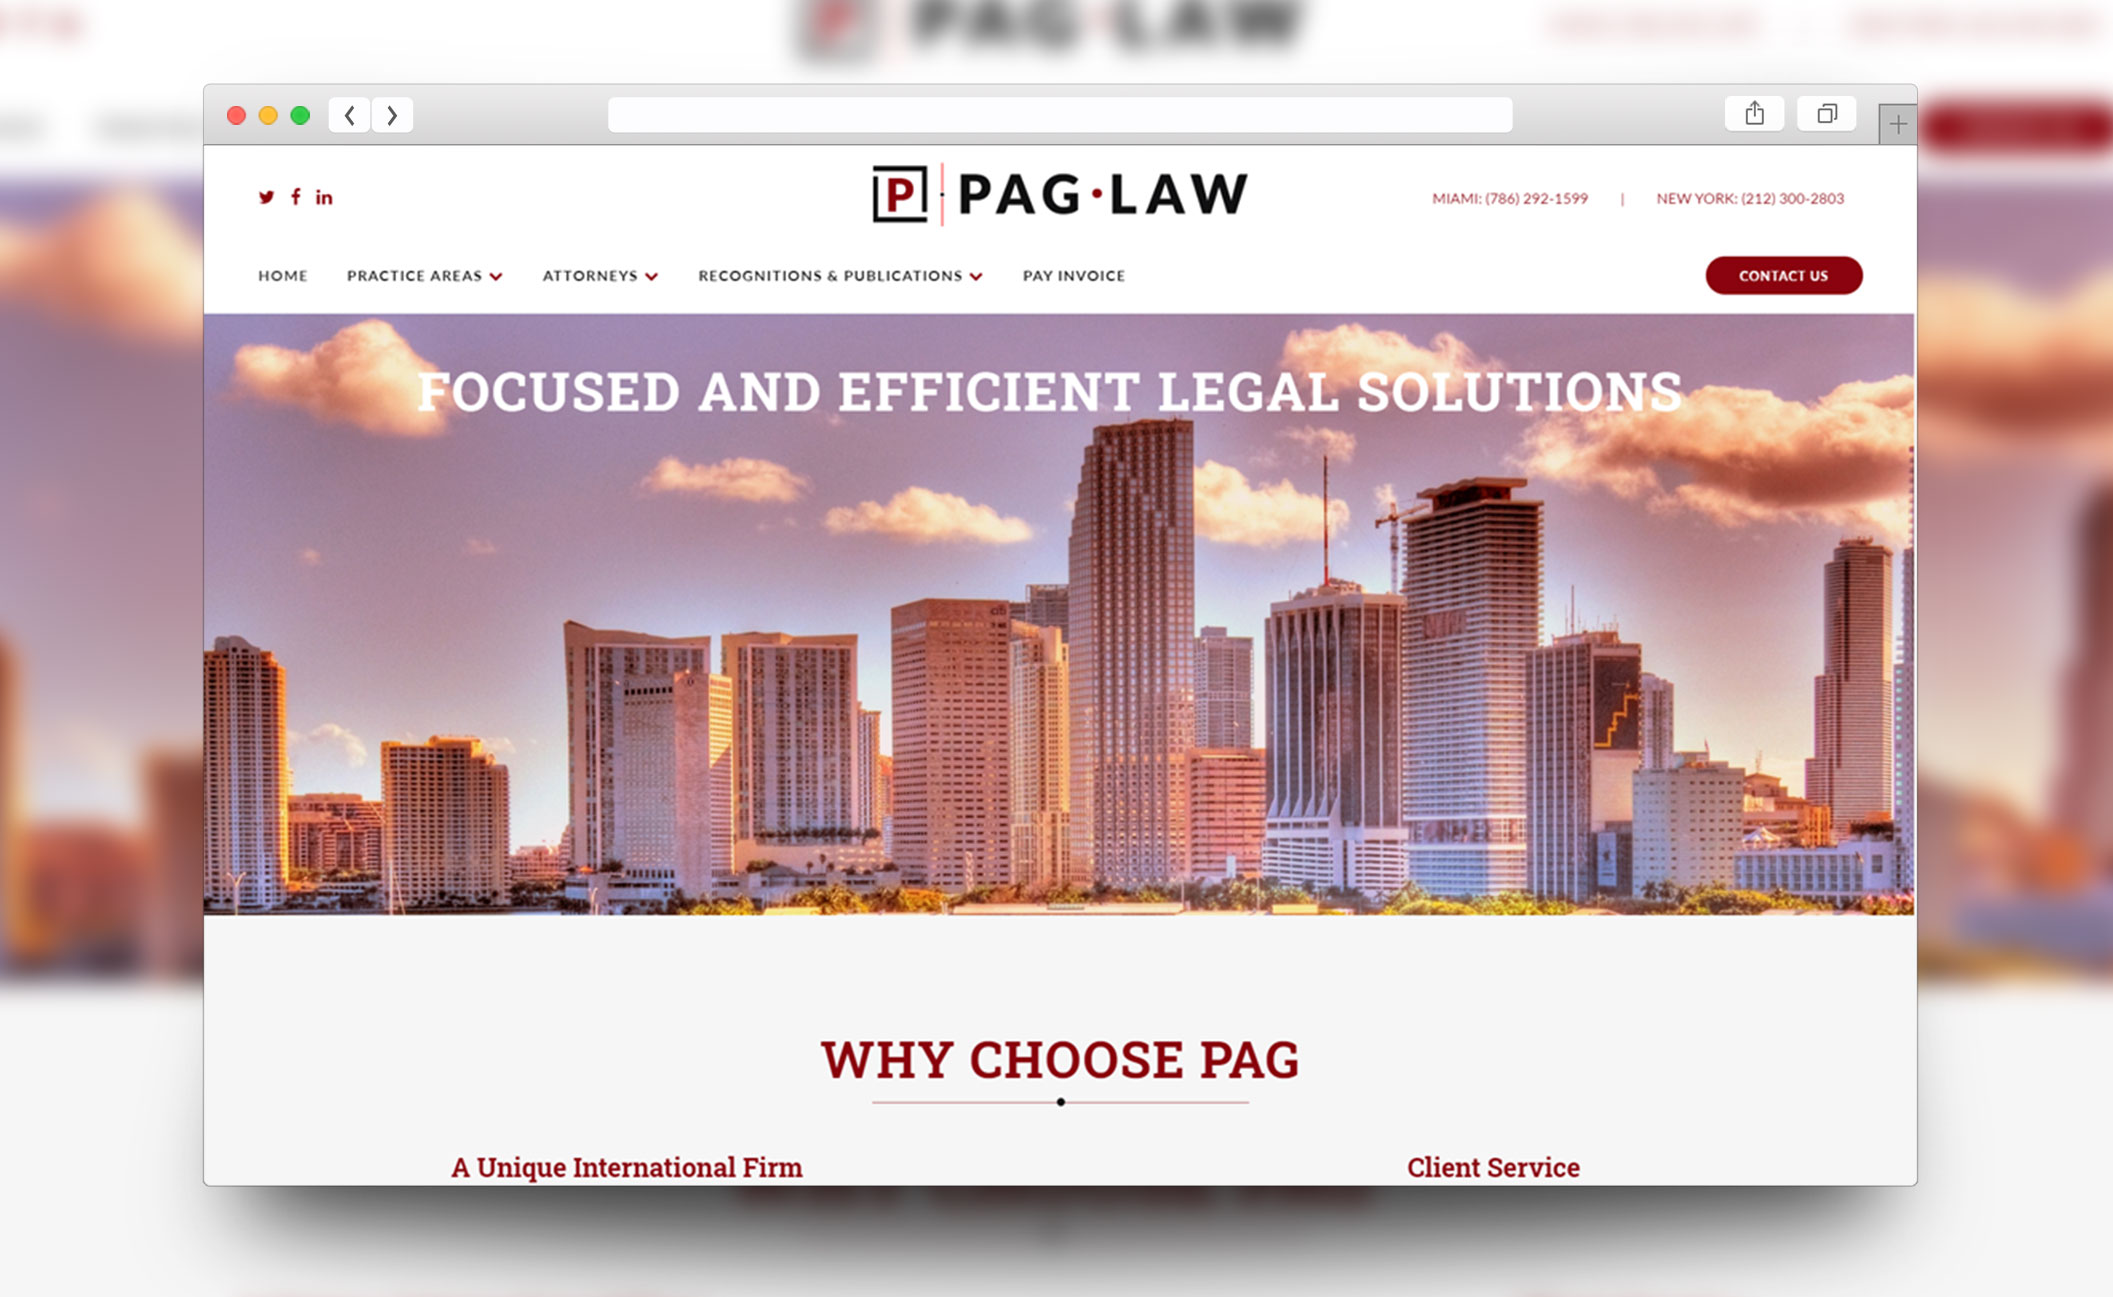 PAG.LAW website